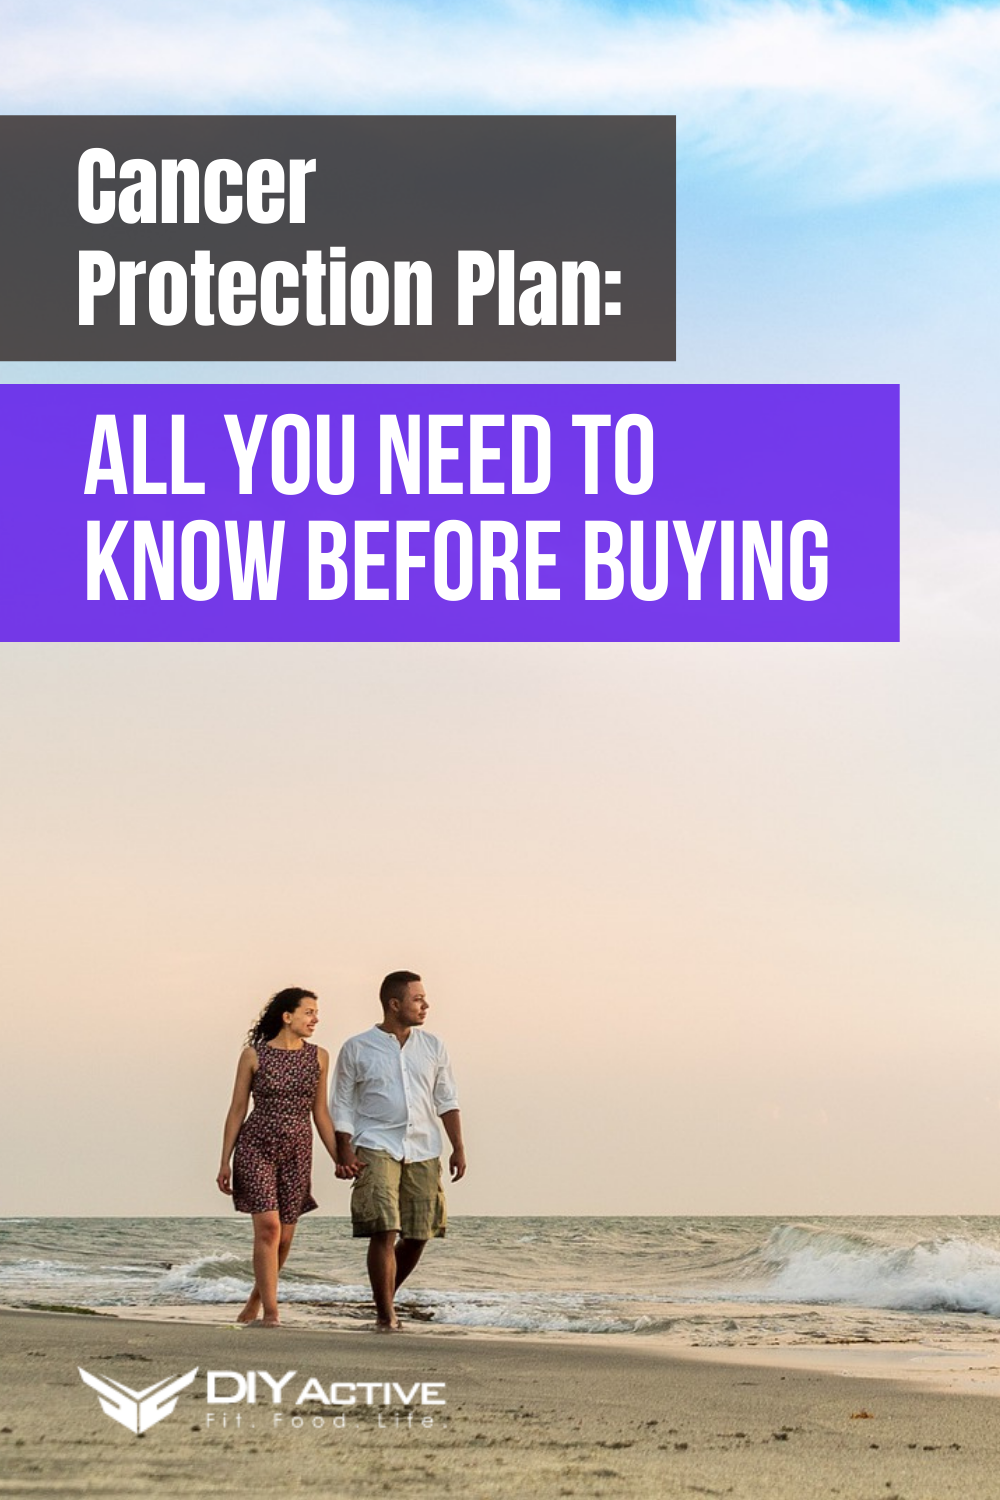 Cancer Protection Plan: All You Need to Know Before Buying